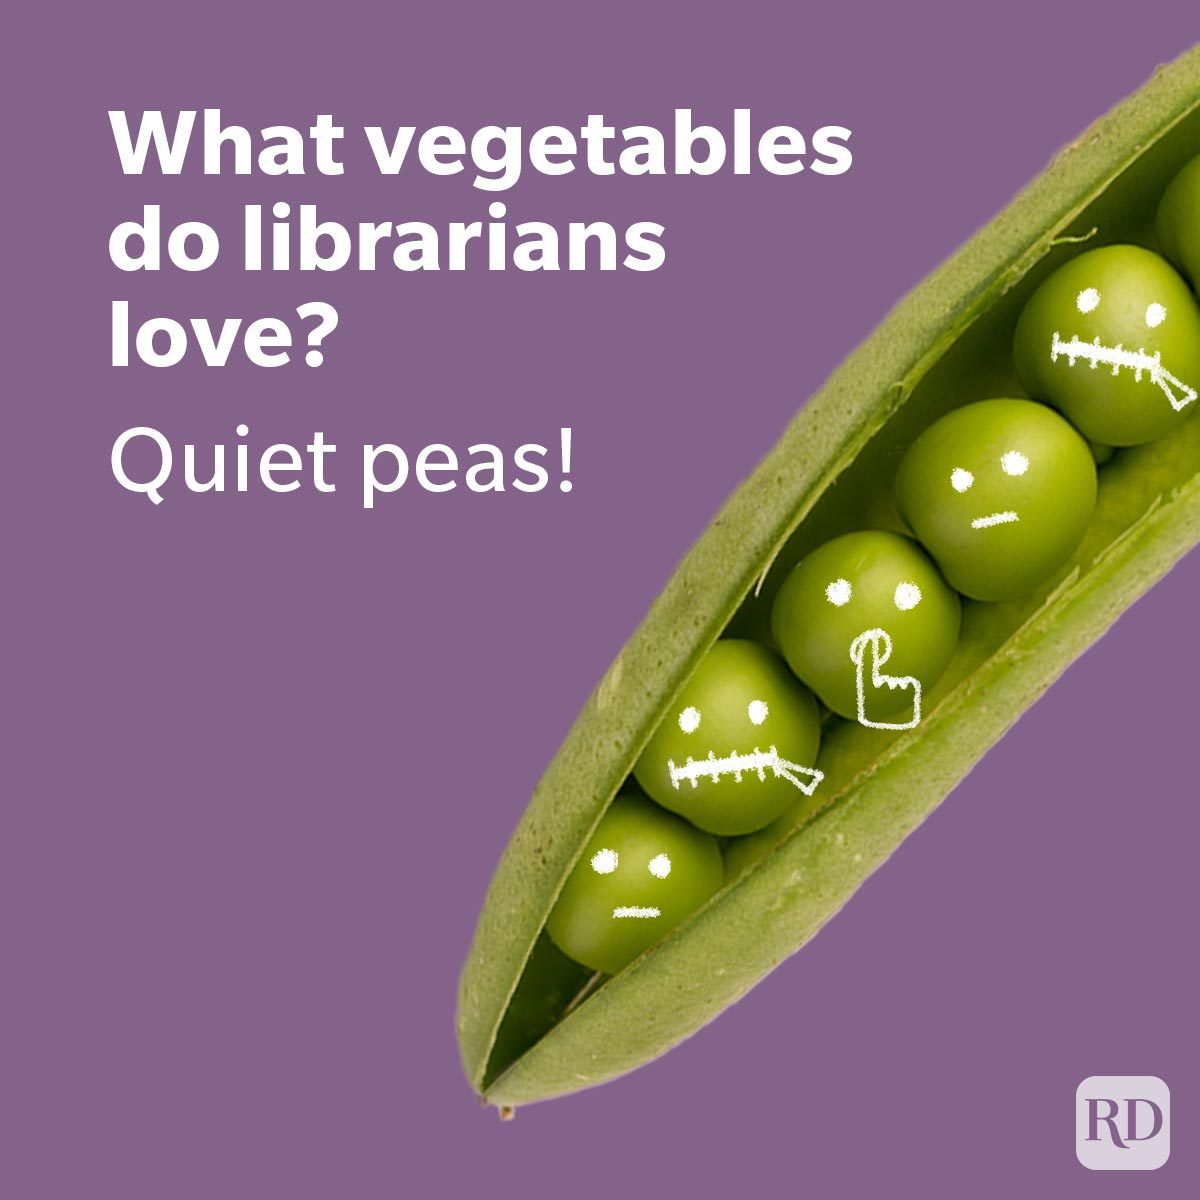 School Jokes That Won't Land You In Detention peas in a green pod with various whispering and shushing facial expressions on purple background